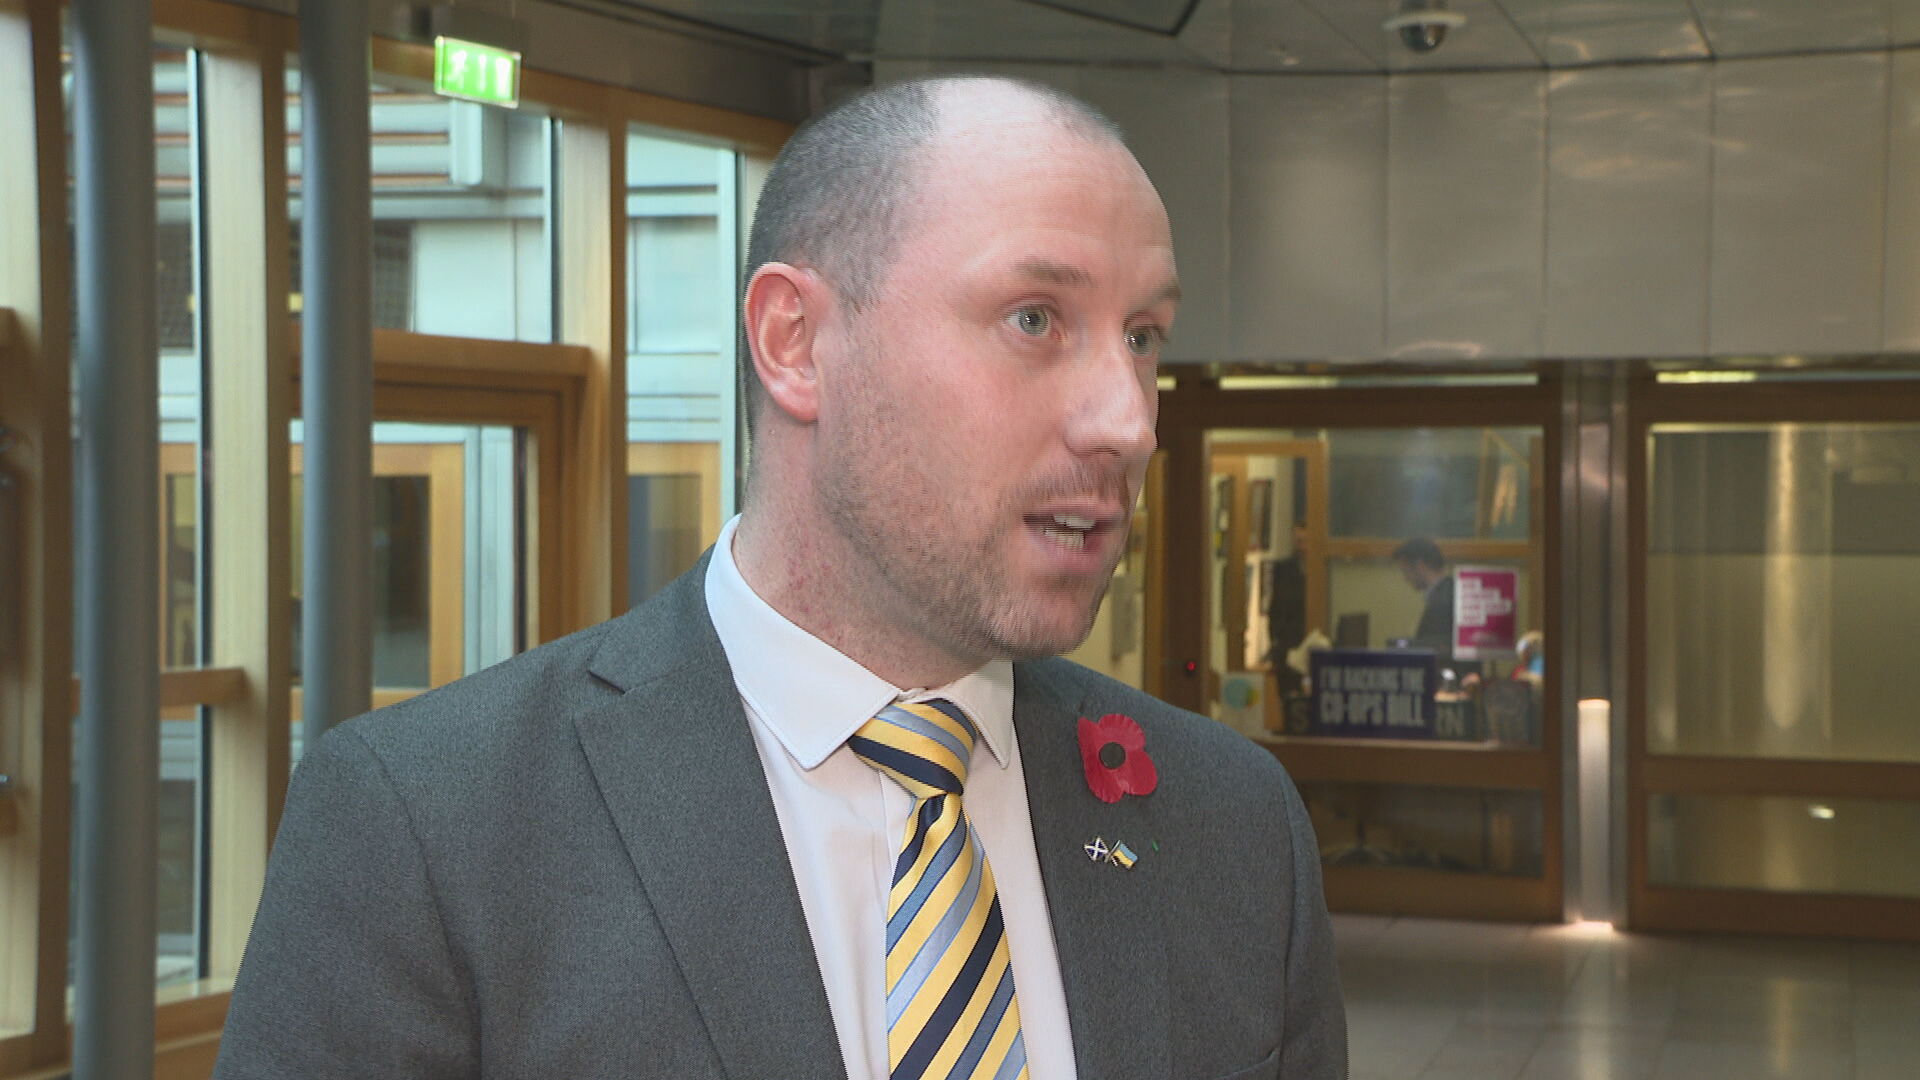 Neil Gray said the investment will help with the transition to renewables in Scotland.